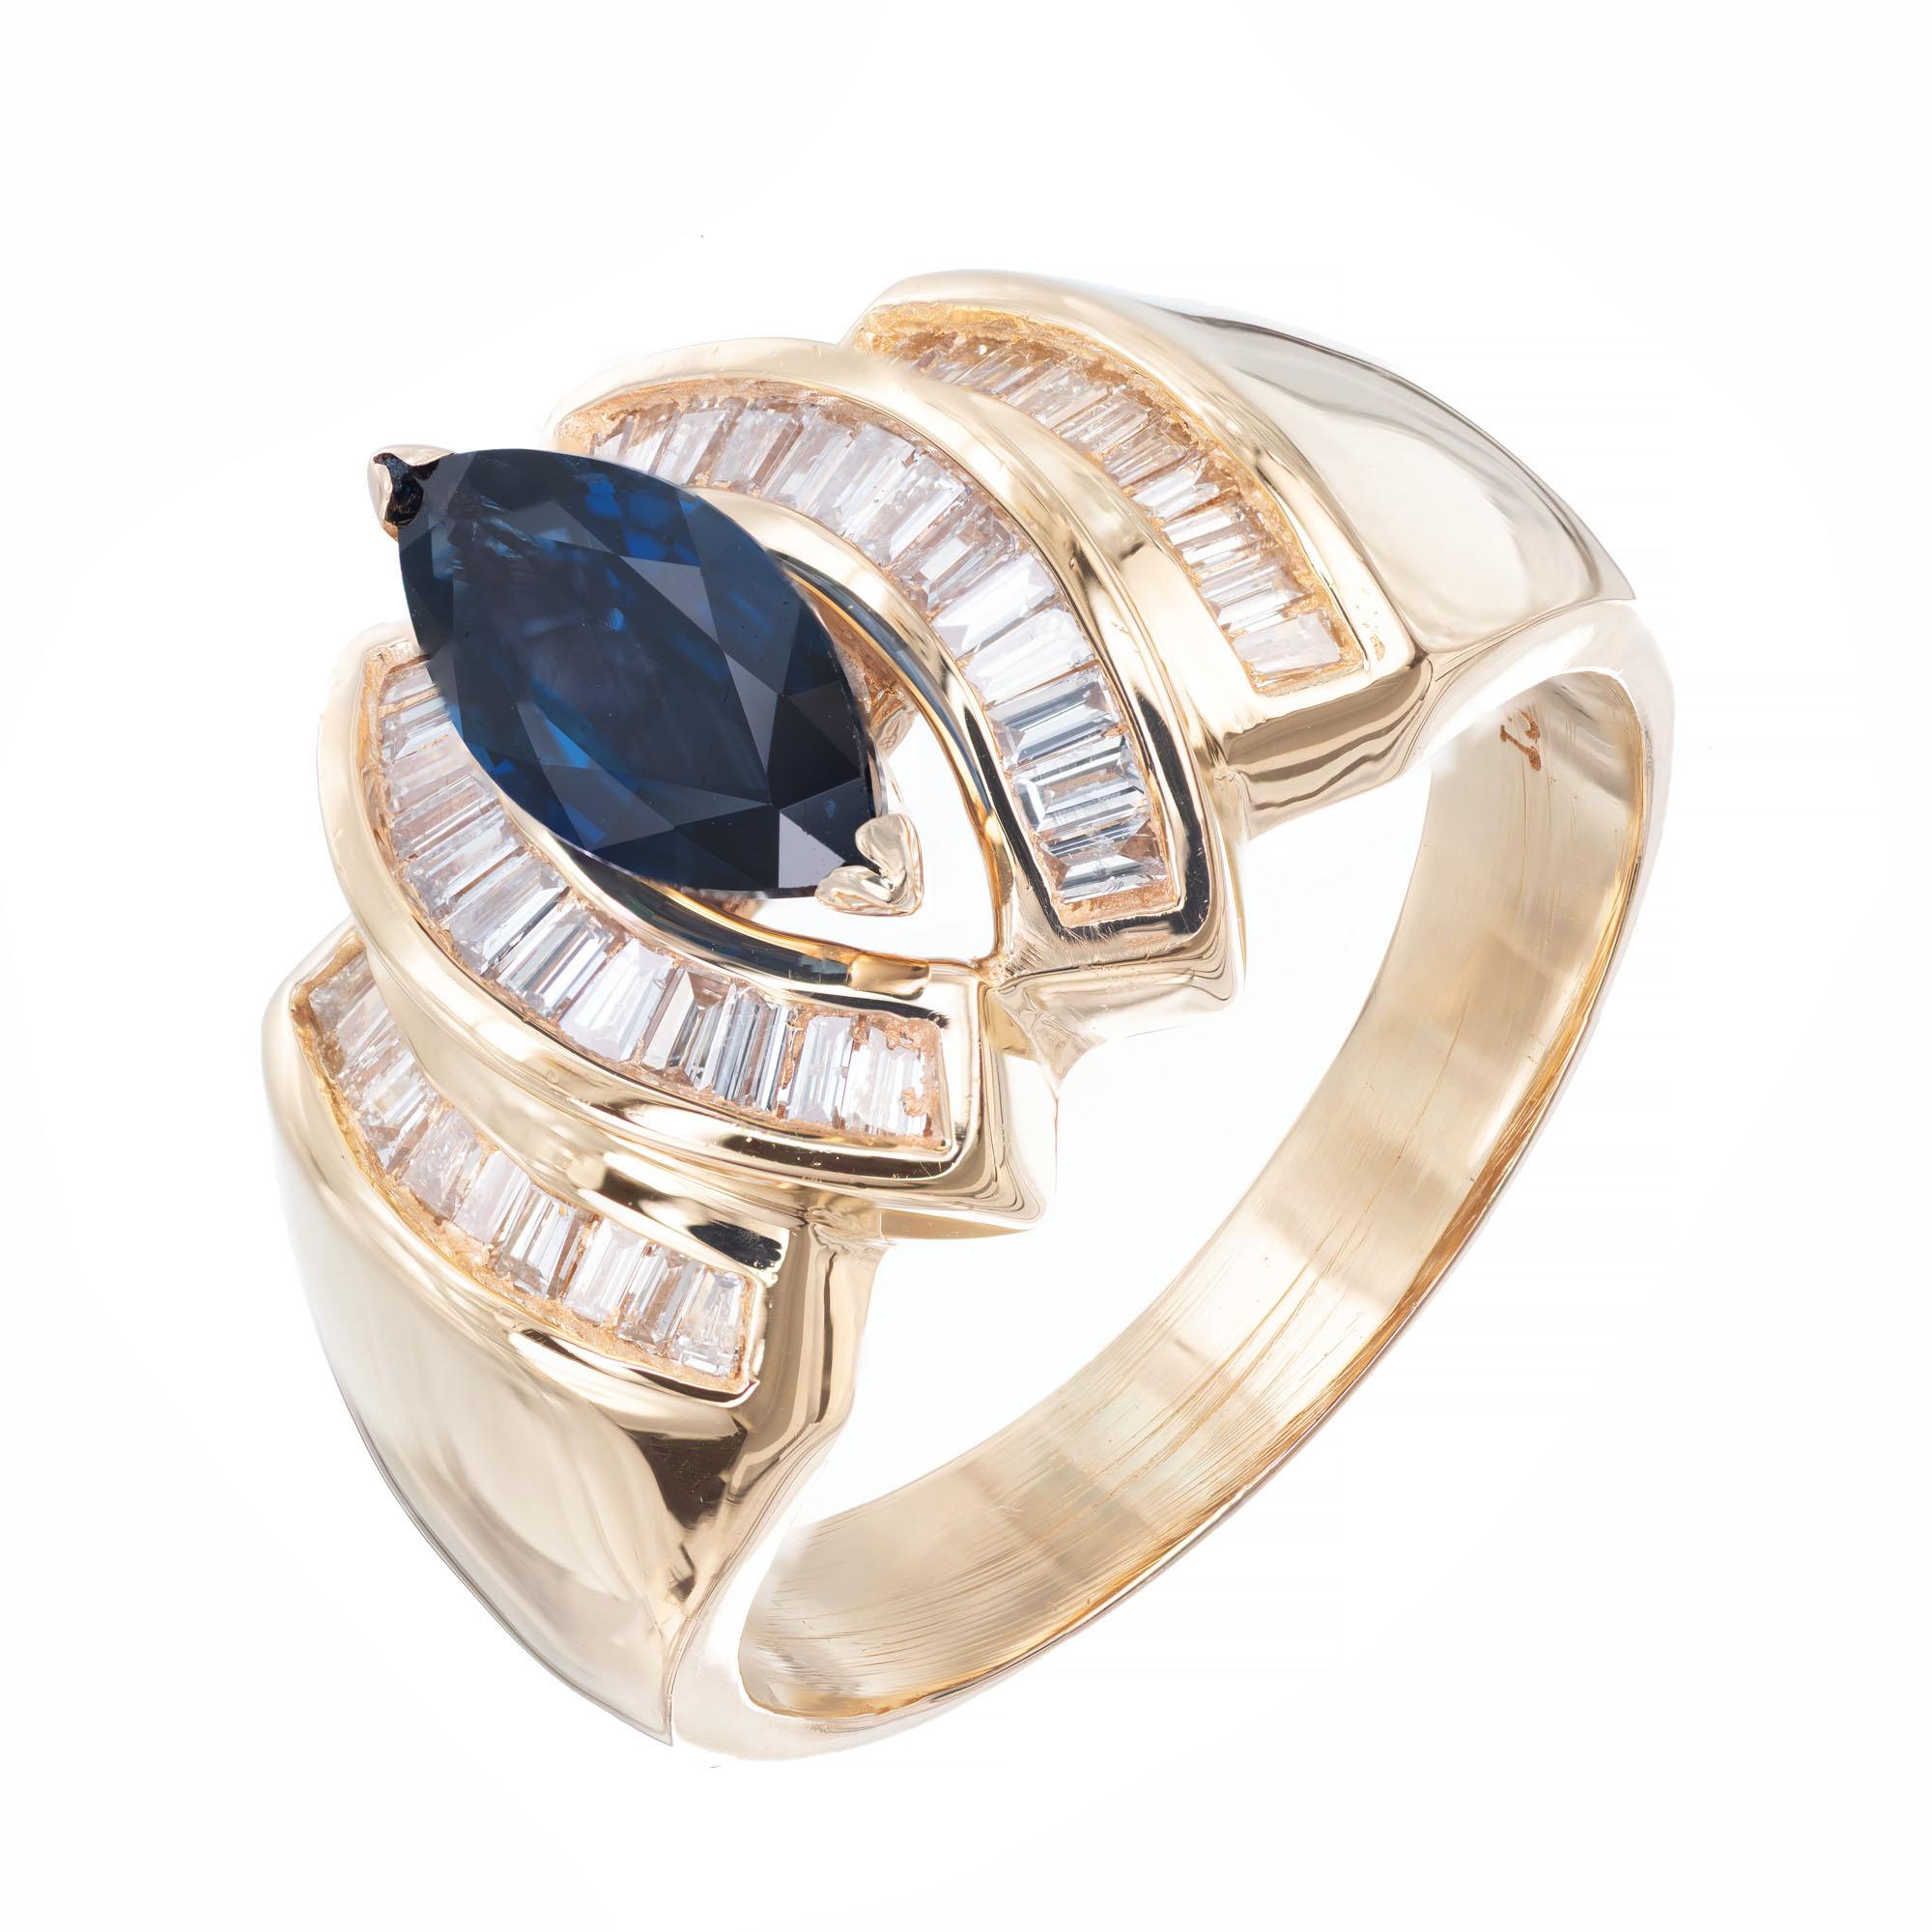 1960's Marquise sapphire and diamond cocktail ring. Marquise center sapphire with 42 baguette accent diamonds in a 14k yellow gold setting. 

1 marquise cut sapphire 1.15ct.
42 baguette diamonds approx. total weight .50ct, G, VS.
Size 9.5 and